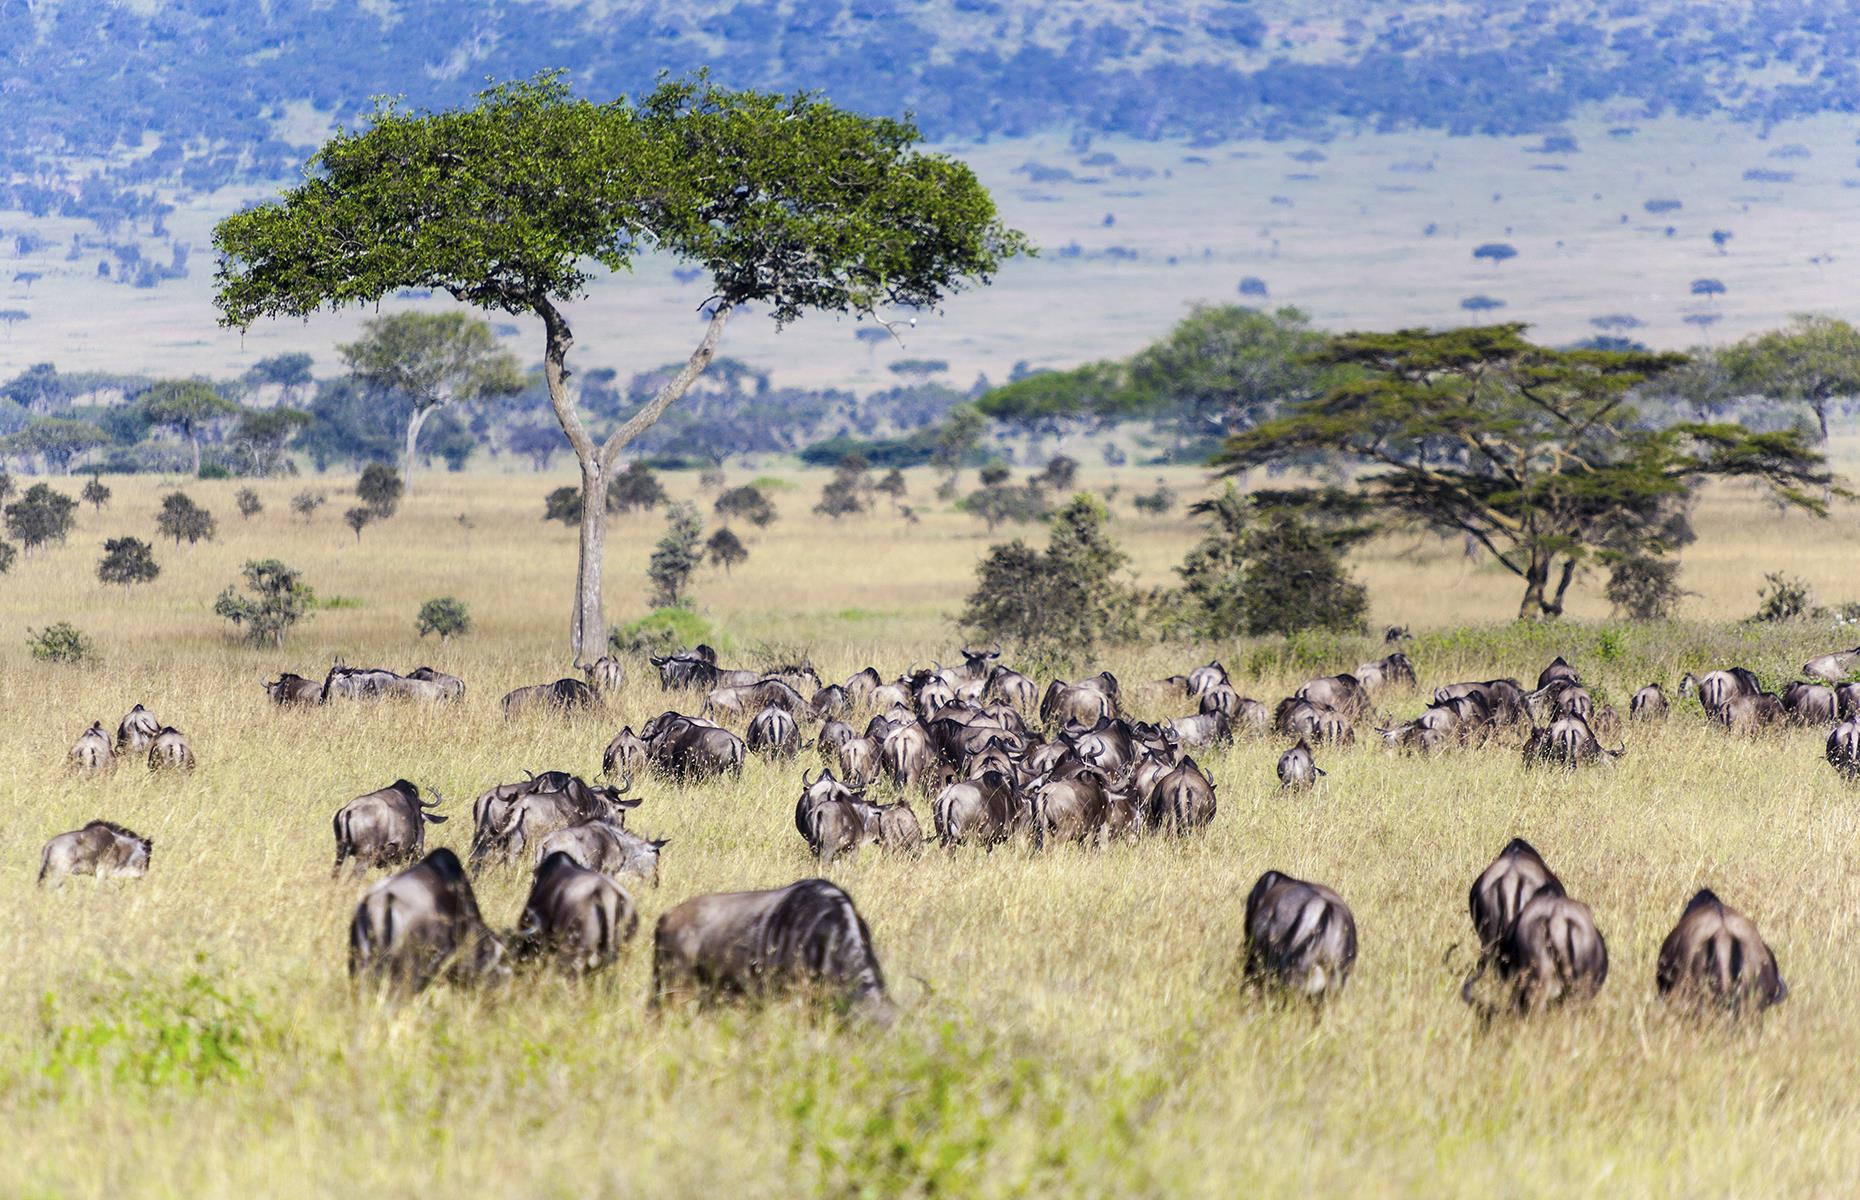 <p>The Great Migration sees around 1.5 million wildebeest (plus 200,000 zebras) make their way across the Serengeti, in Tanzania and the Maasai Mara in Kenya. Time your safari right and you'll be in for one amazing wildlife experience.</p>  <p><a href="https://www.loveexploring.com/galleries/88525/the-best-wildlife-experiences-in-the-world?page=1"><strong>These are the best wildlife experiences in the world</strong></a></p>